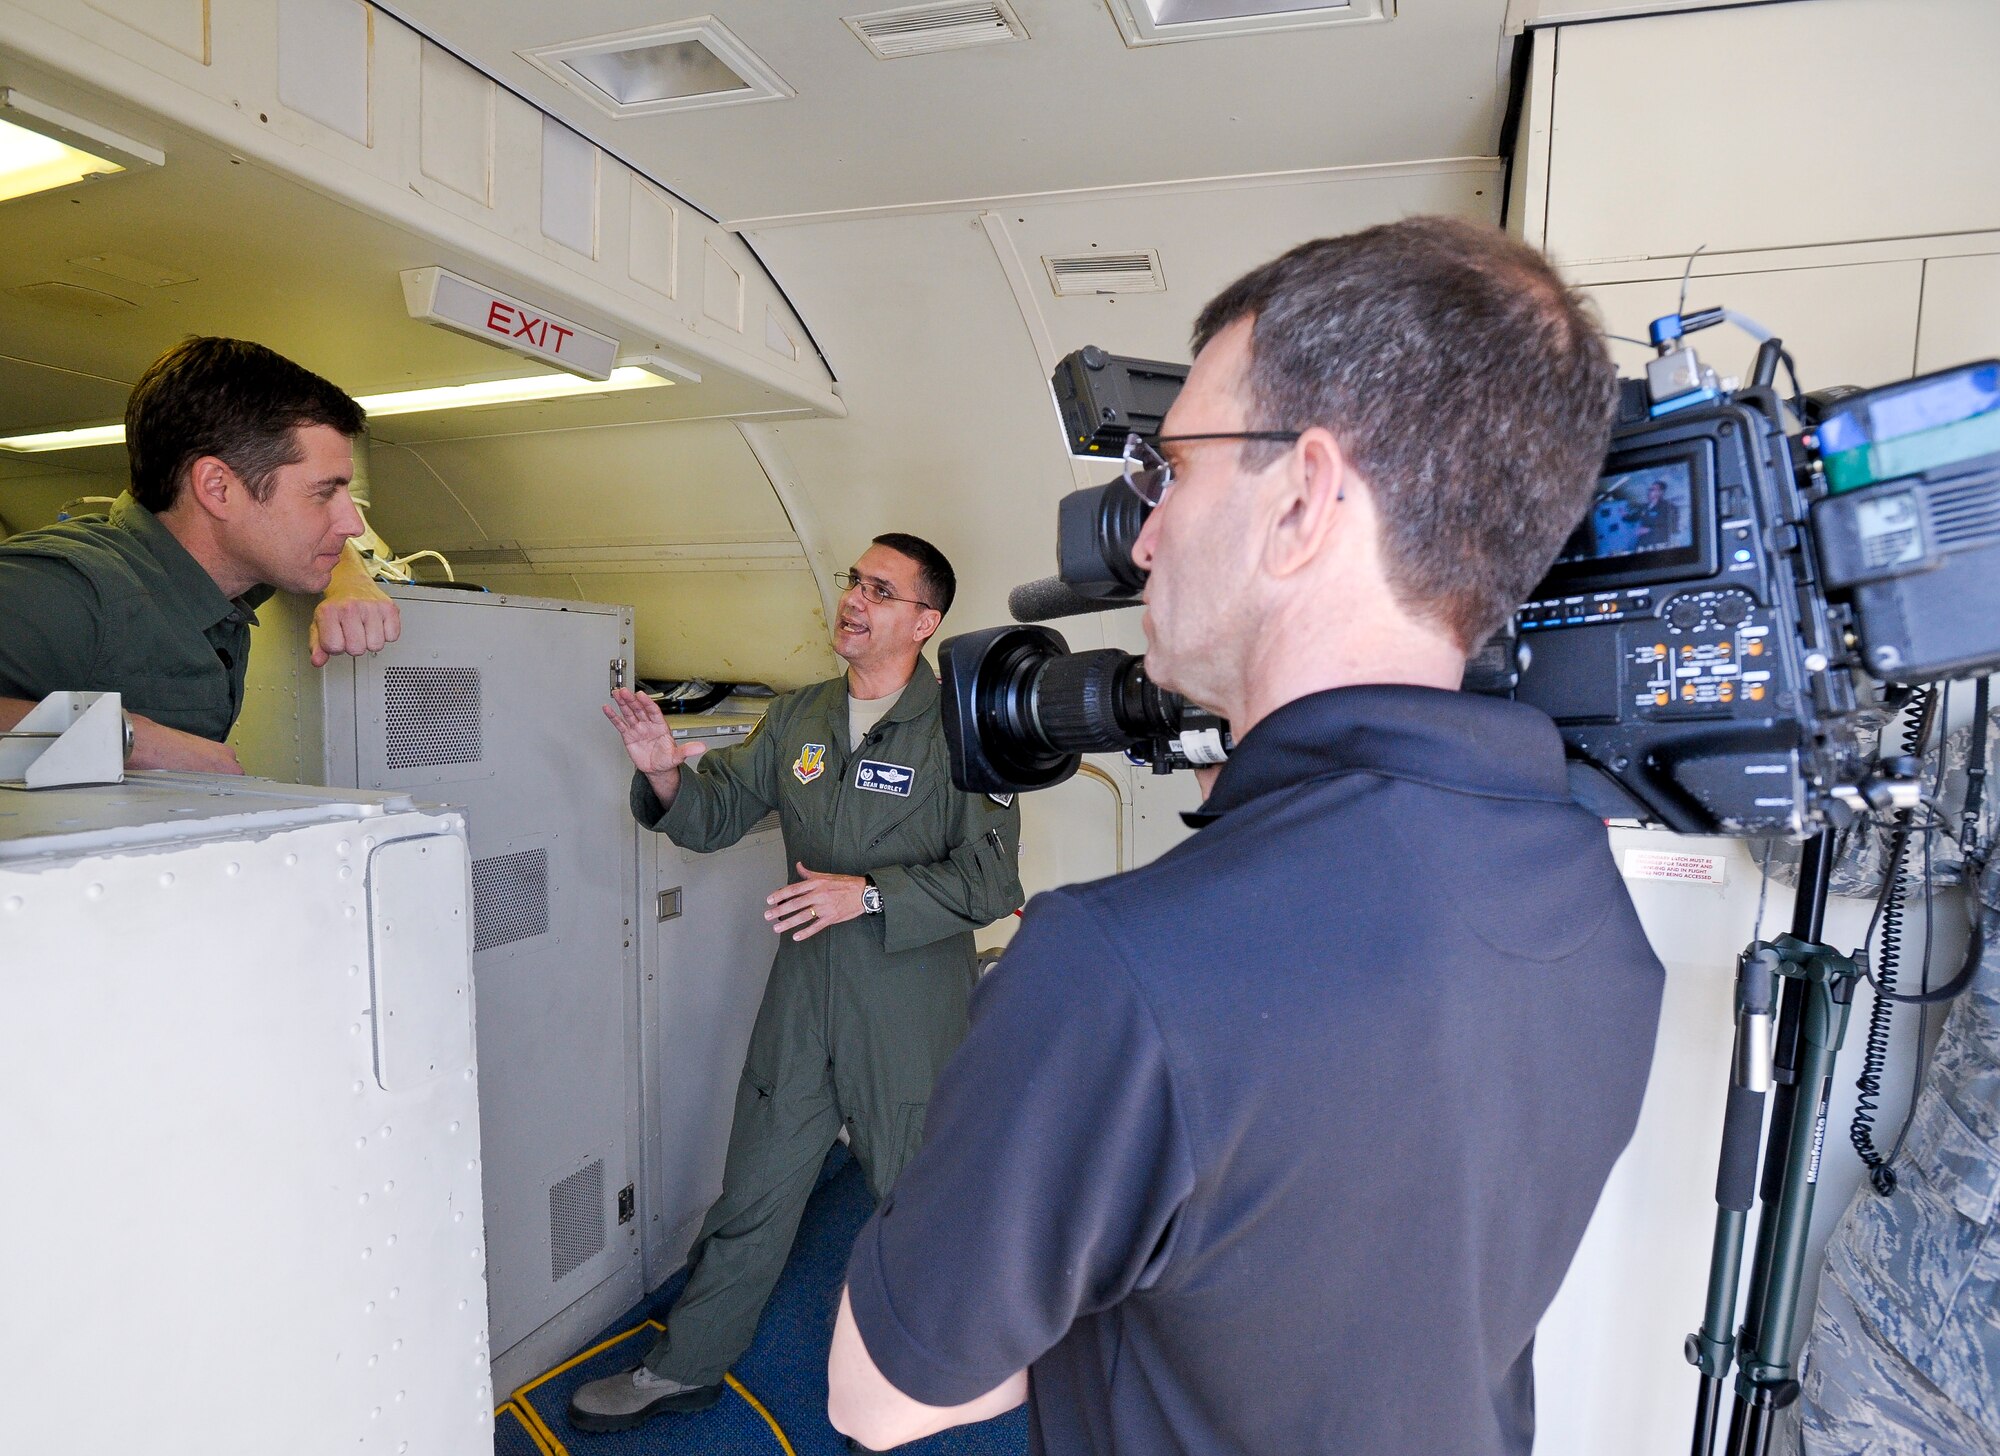 Col. Dean Worley, 461st Air Control Wing commander, left, is interview by Reynolds Wolf, CNN correspondent, aboard an E-8C Joint STARS at Robins Air Force Base, Ga., March 27, 2012.  JSTARS was one of several units the news organization visited during a tour of Robins Air Force Base.  (U. S. Air Force photo by Master Sgt. Roger Parsons)
